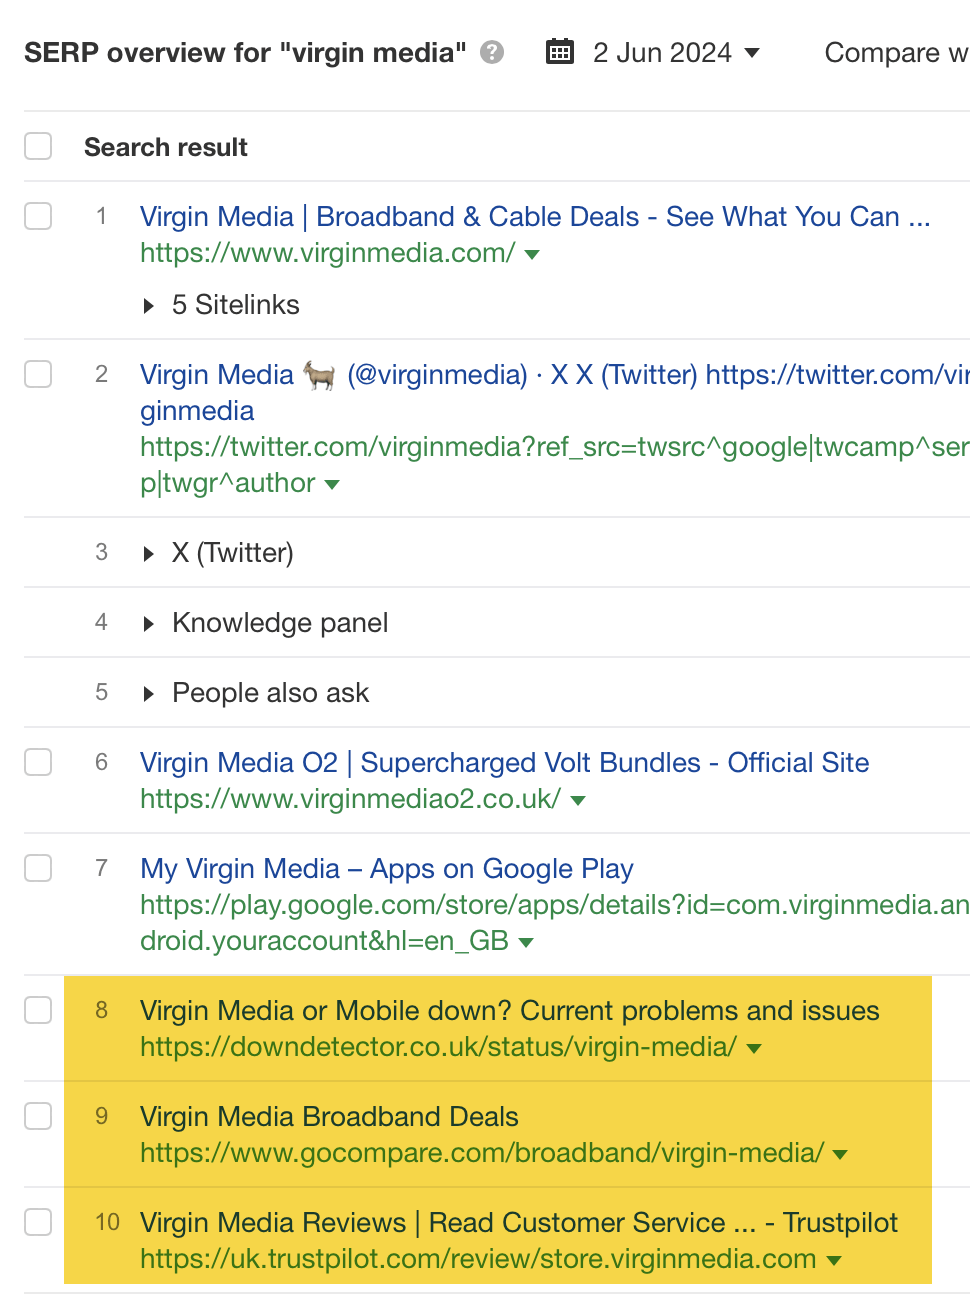 SERP example of where the brand doesn't own all of the top results